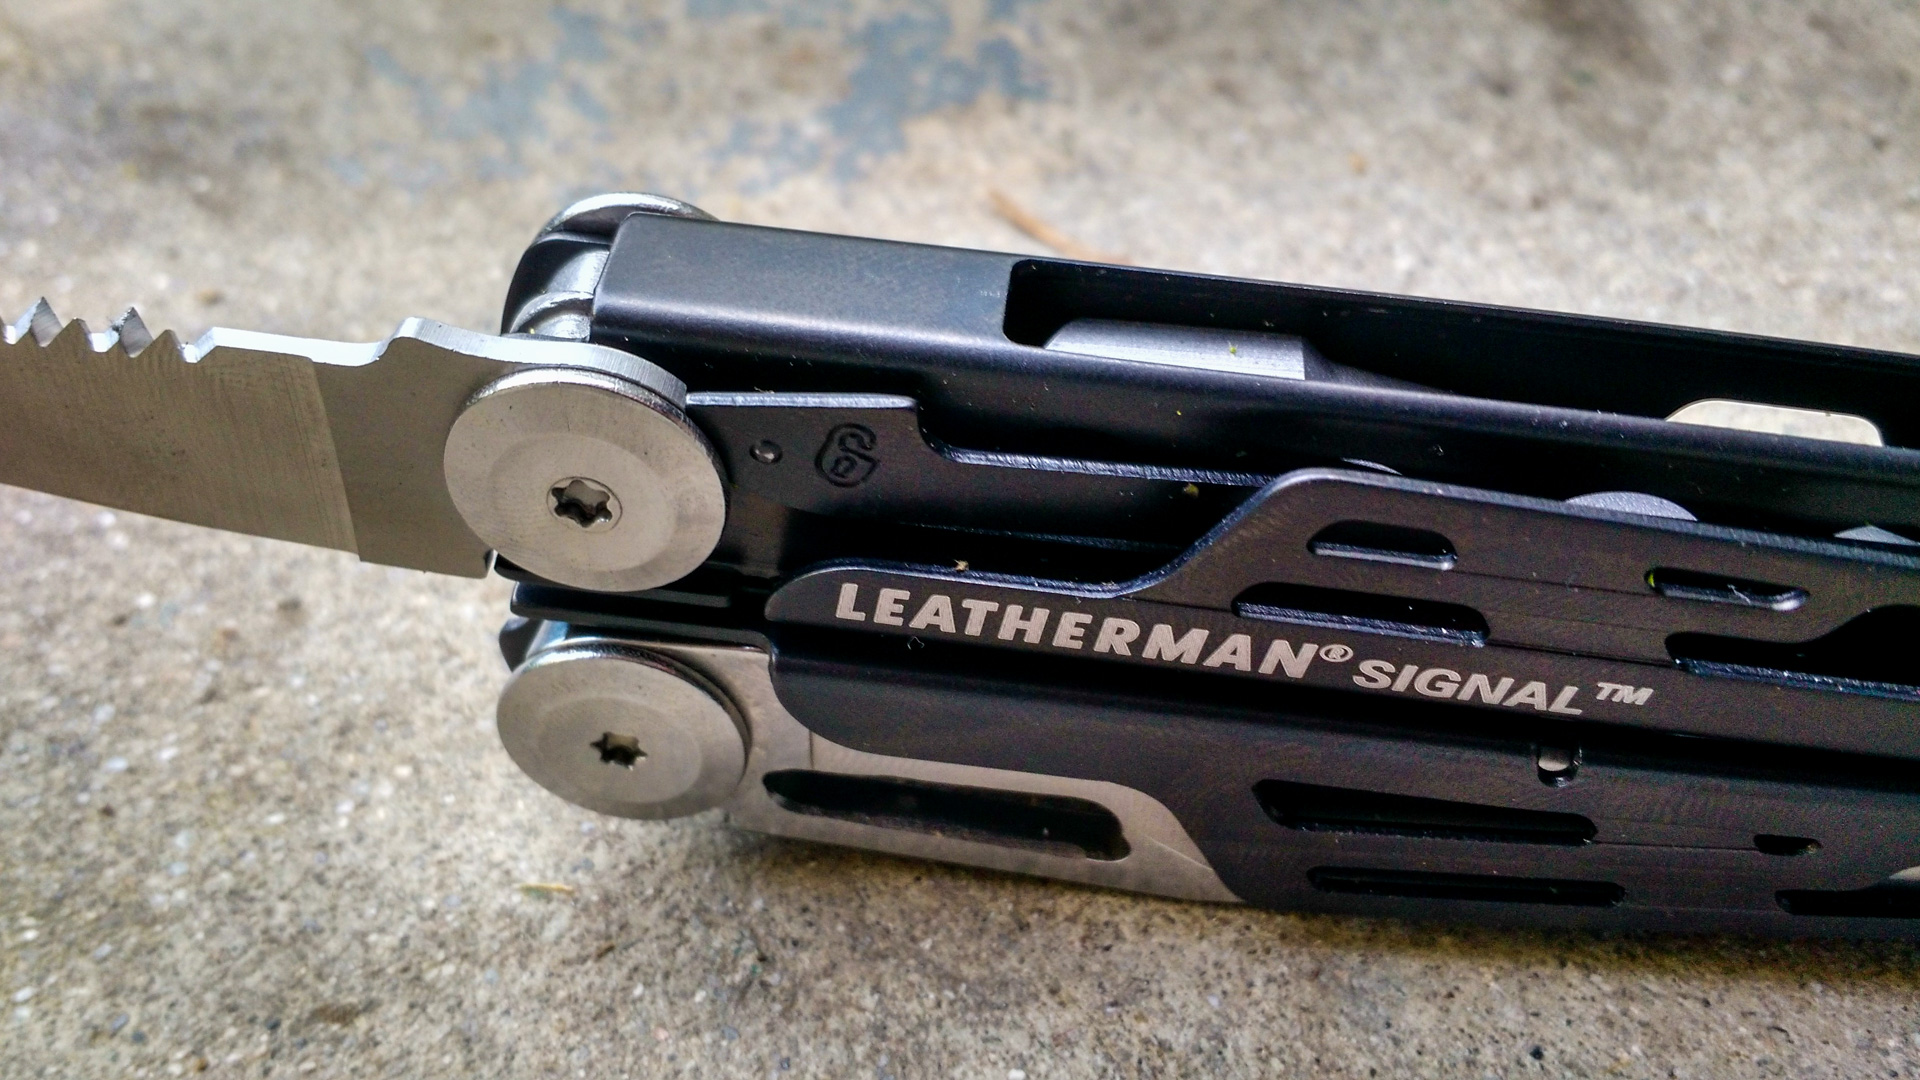 Leatherman Signal Review: Can This Multitool Survive?